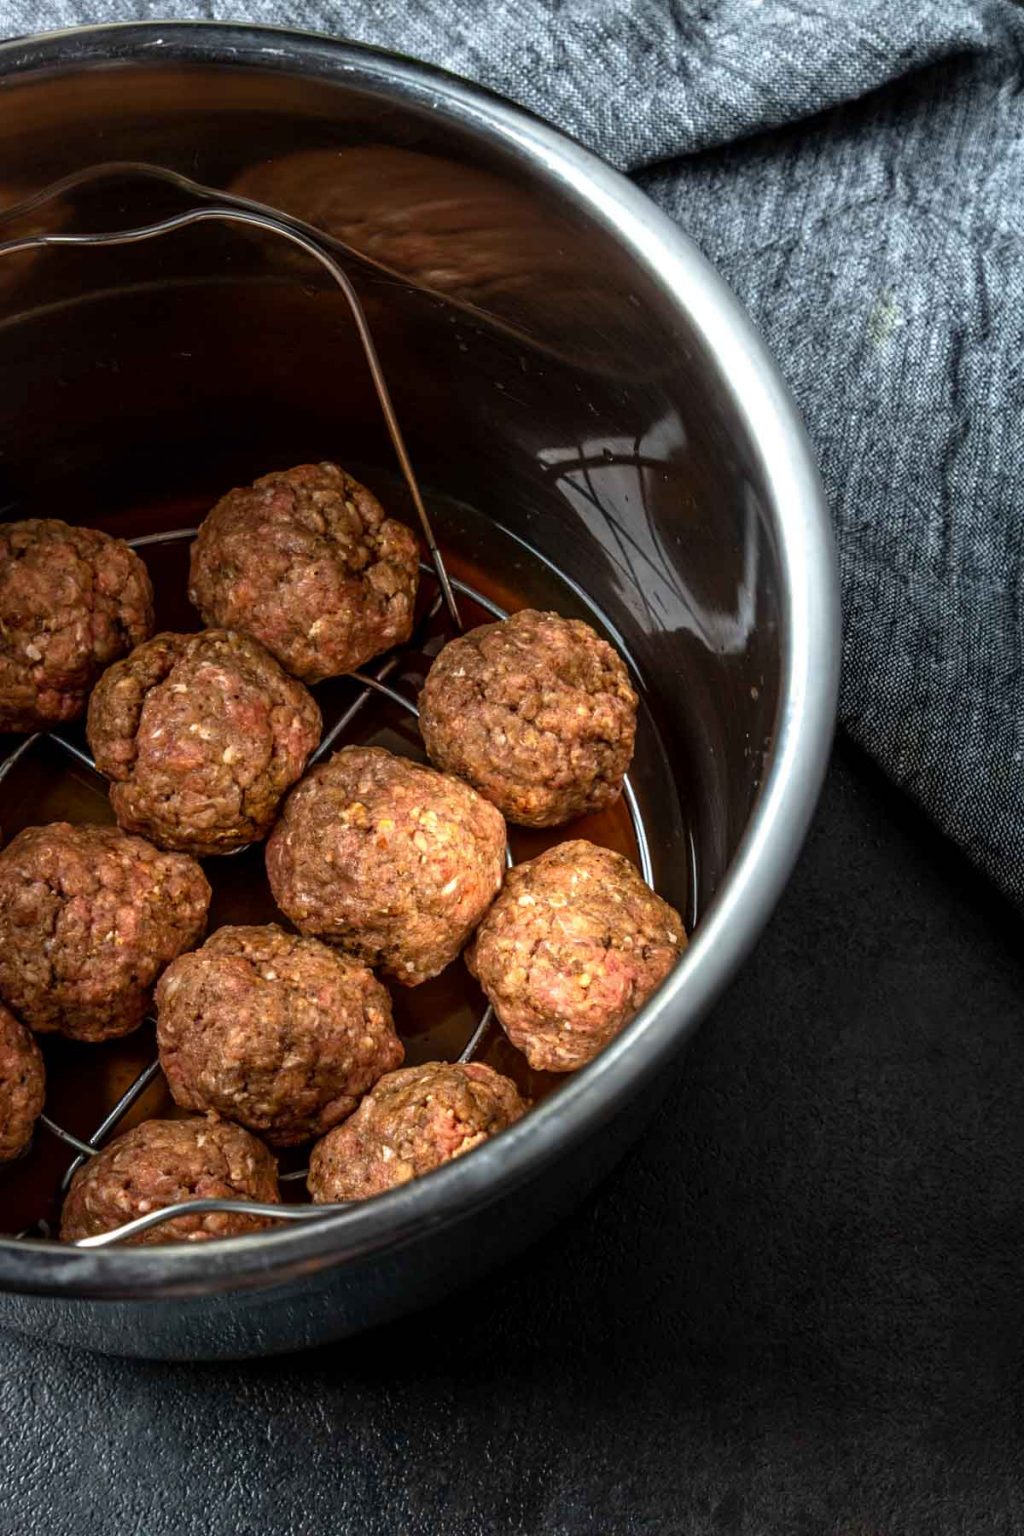 Entree size meatballs in the Instant Pot